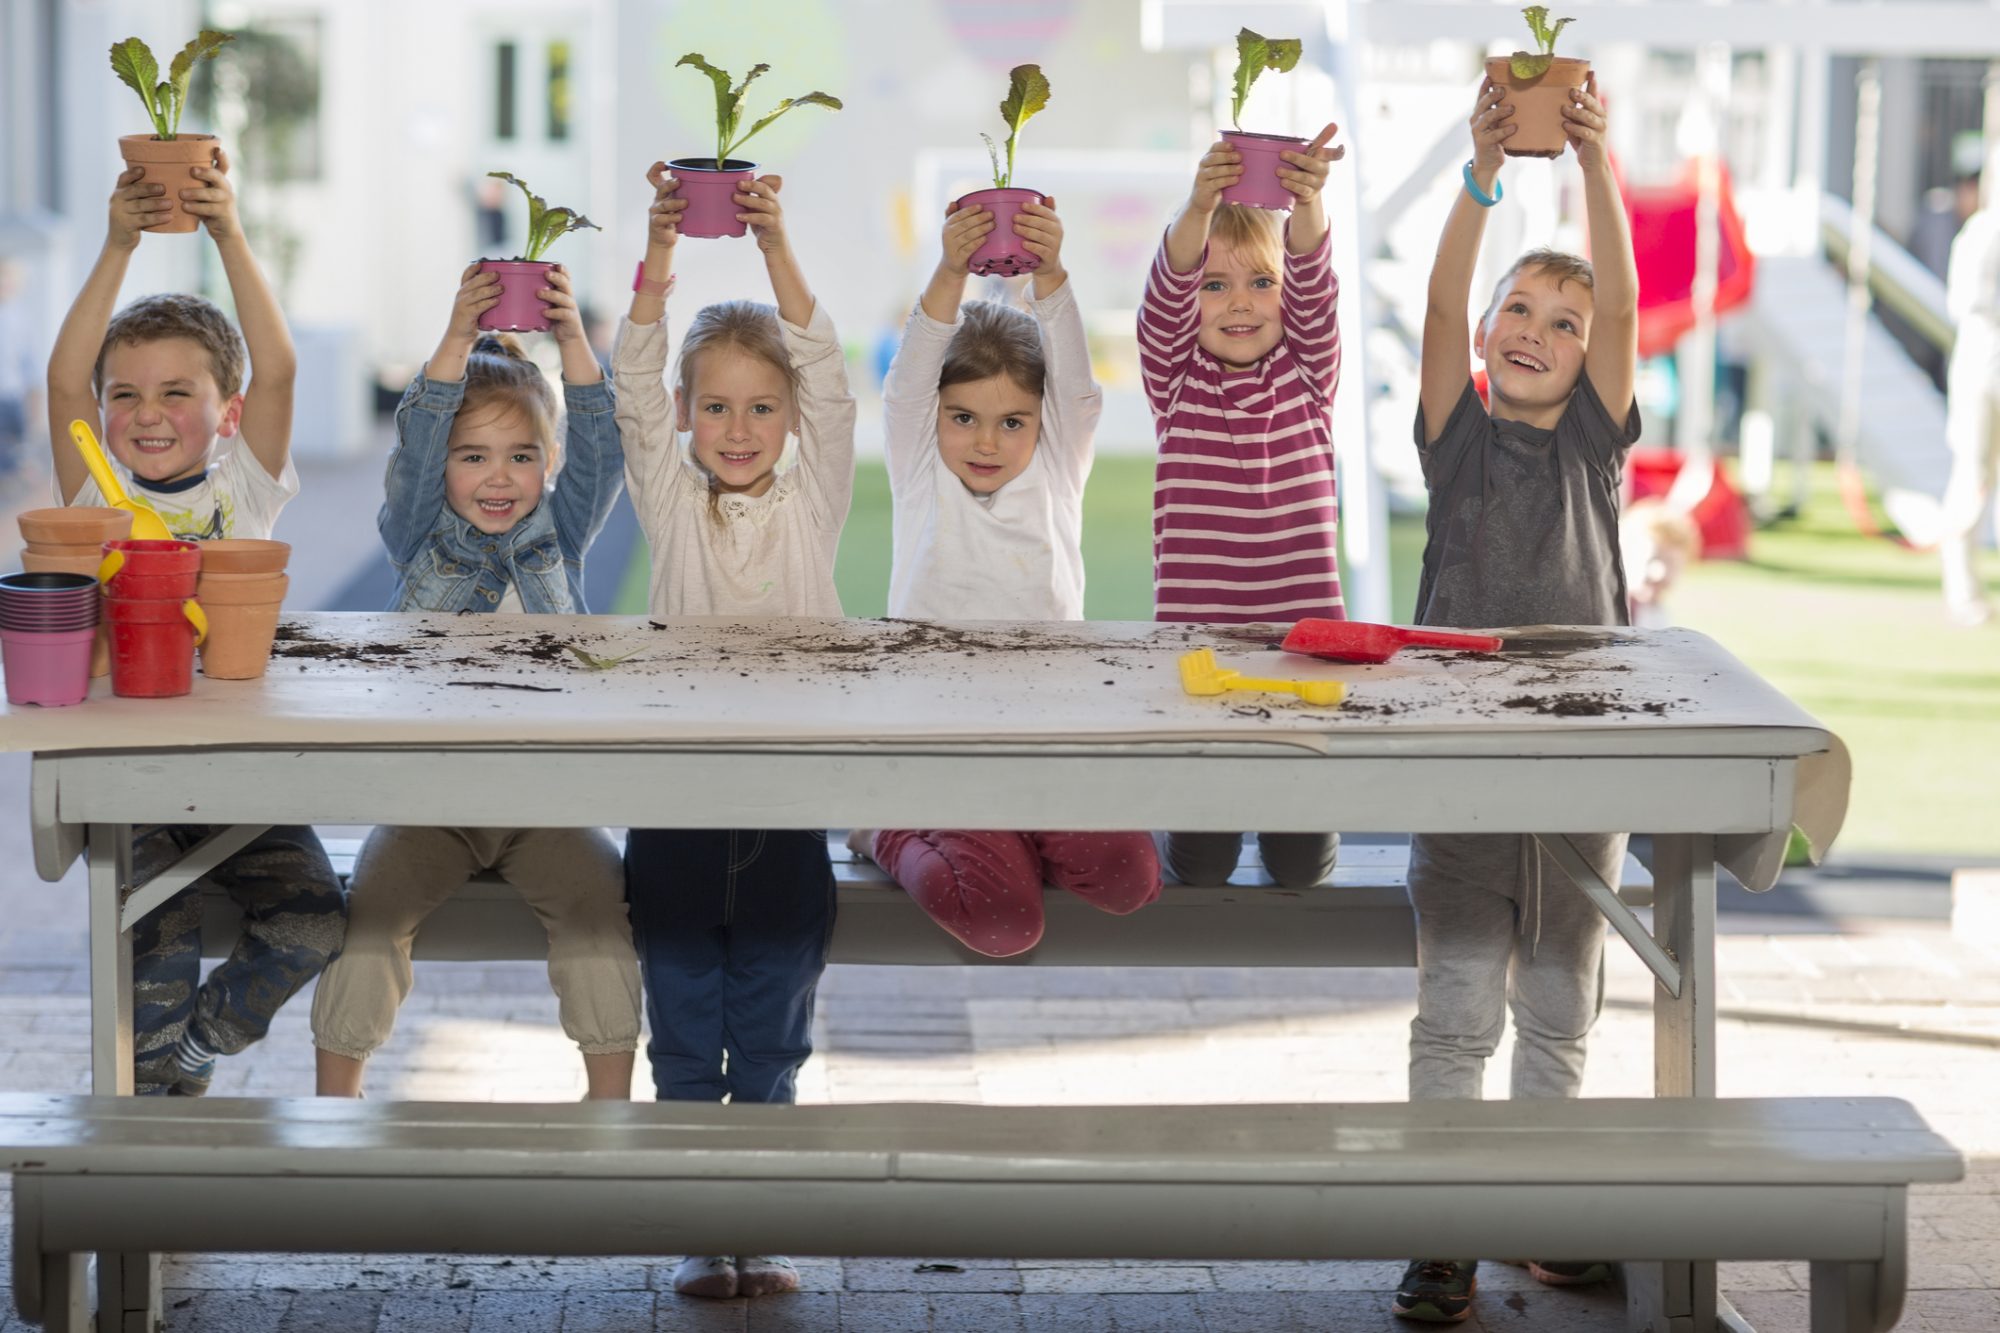 Girls and boys at preschool holding up pot plants at picnic table